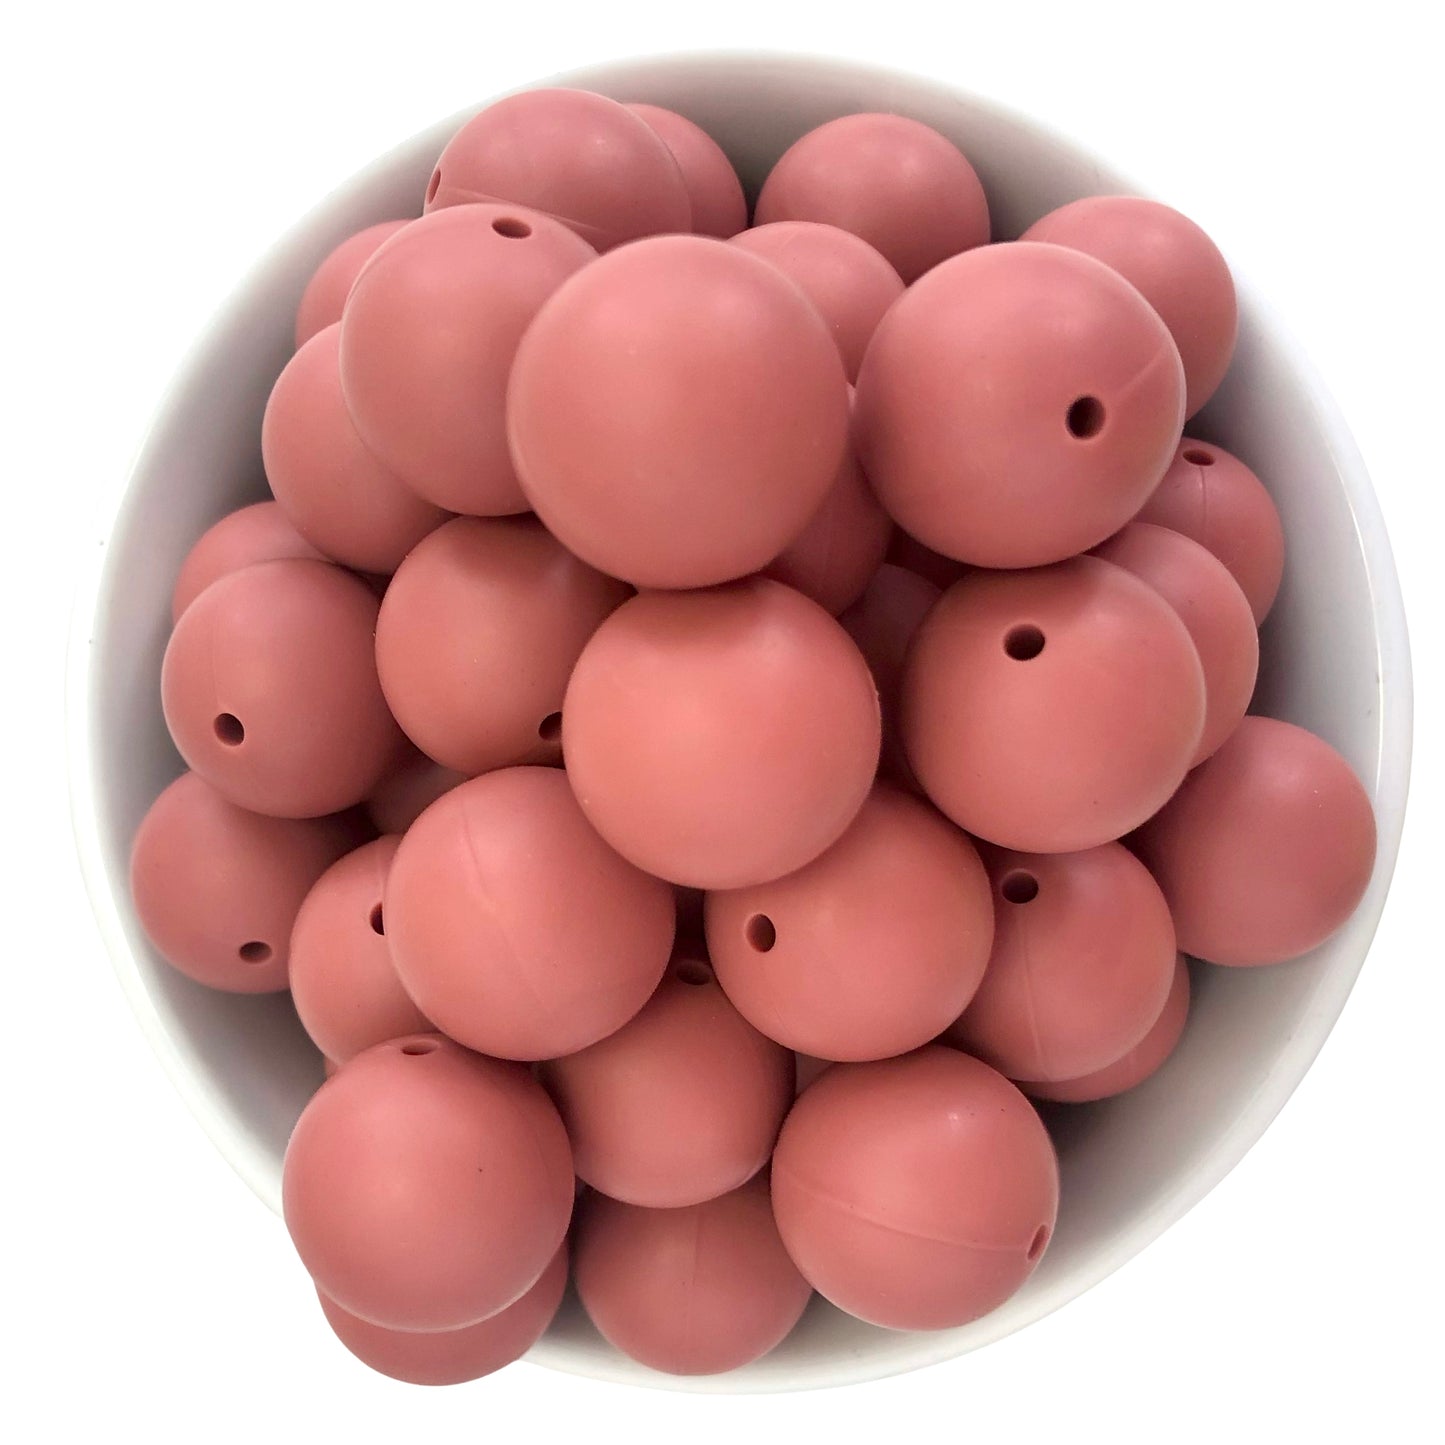 Dusty Brick 15mm Silicone Beads - 10 pk.